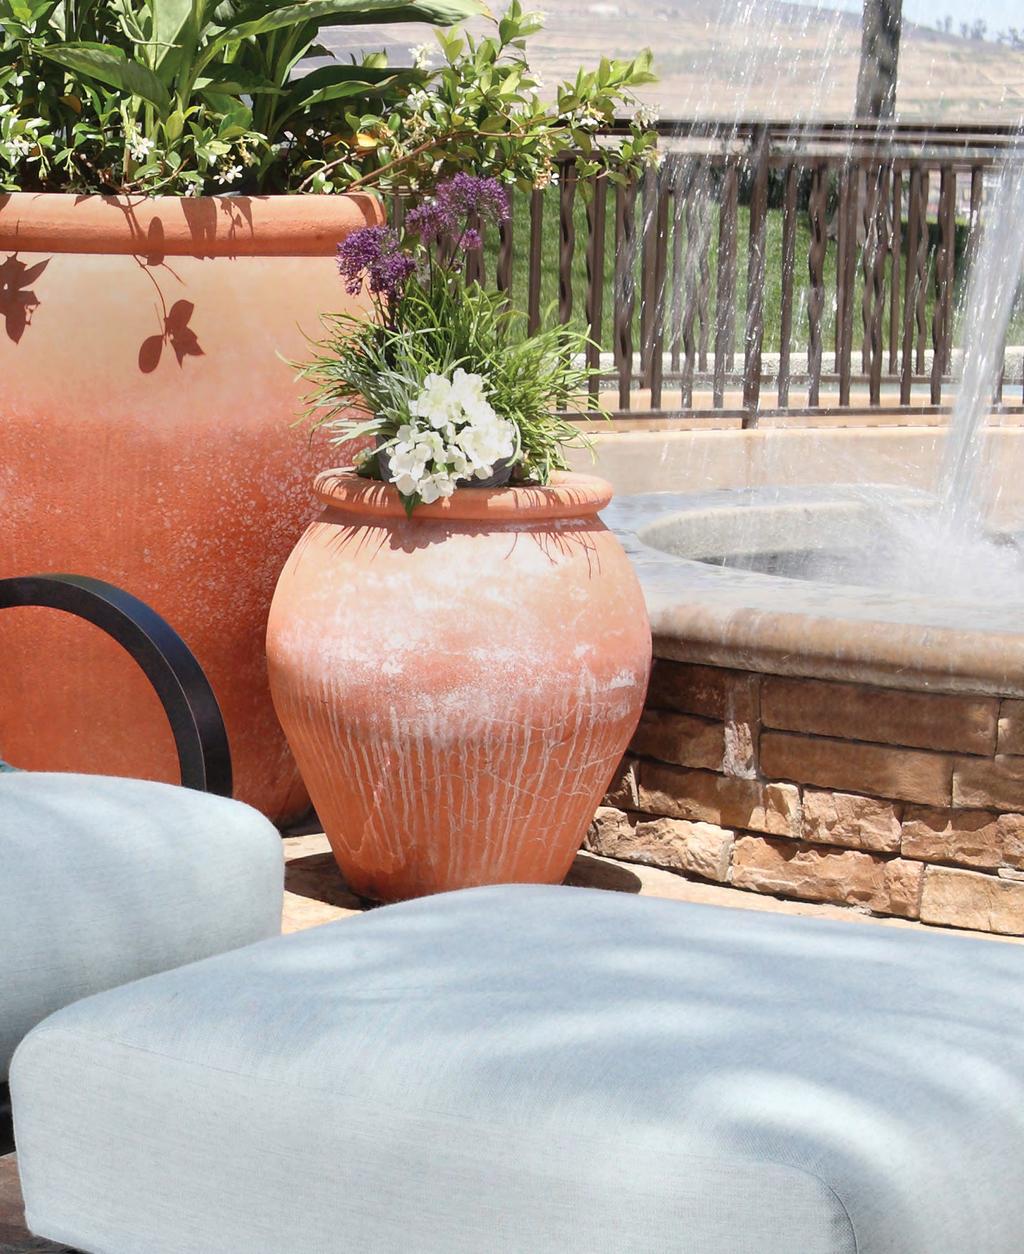 TIMELESS Casual look, luxurious feel where classic design meets Mallin comfort. A regal presence to your backyard oasis.